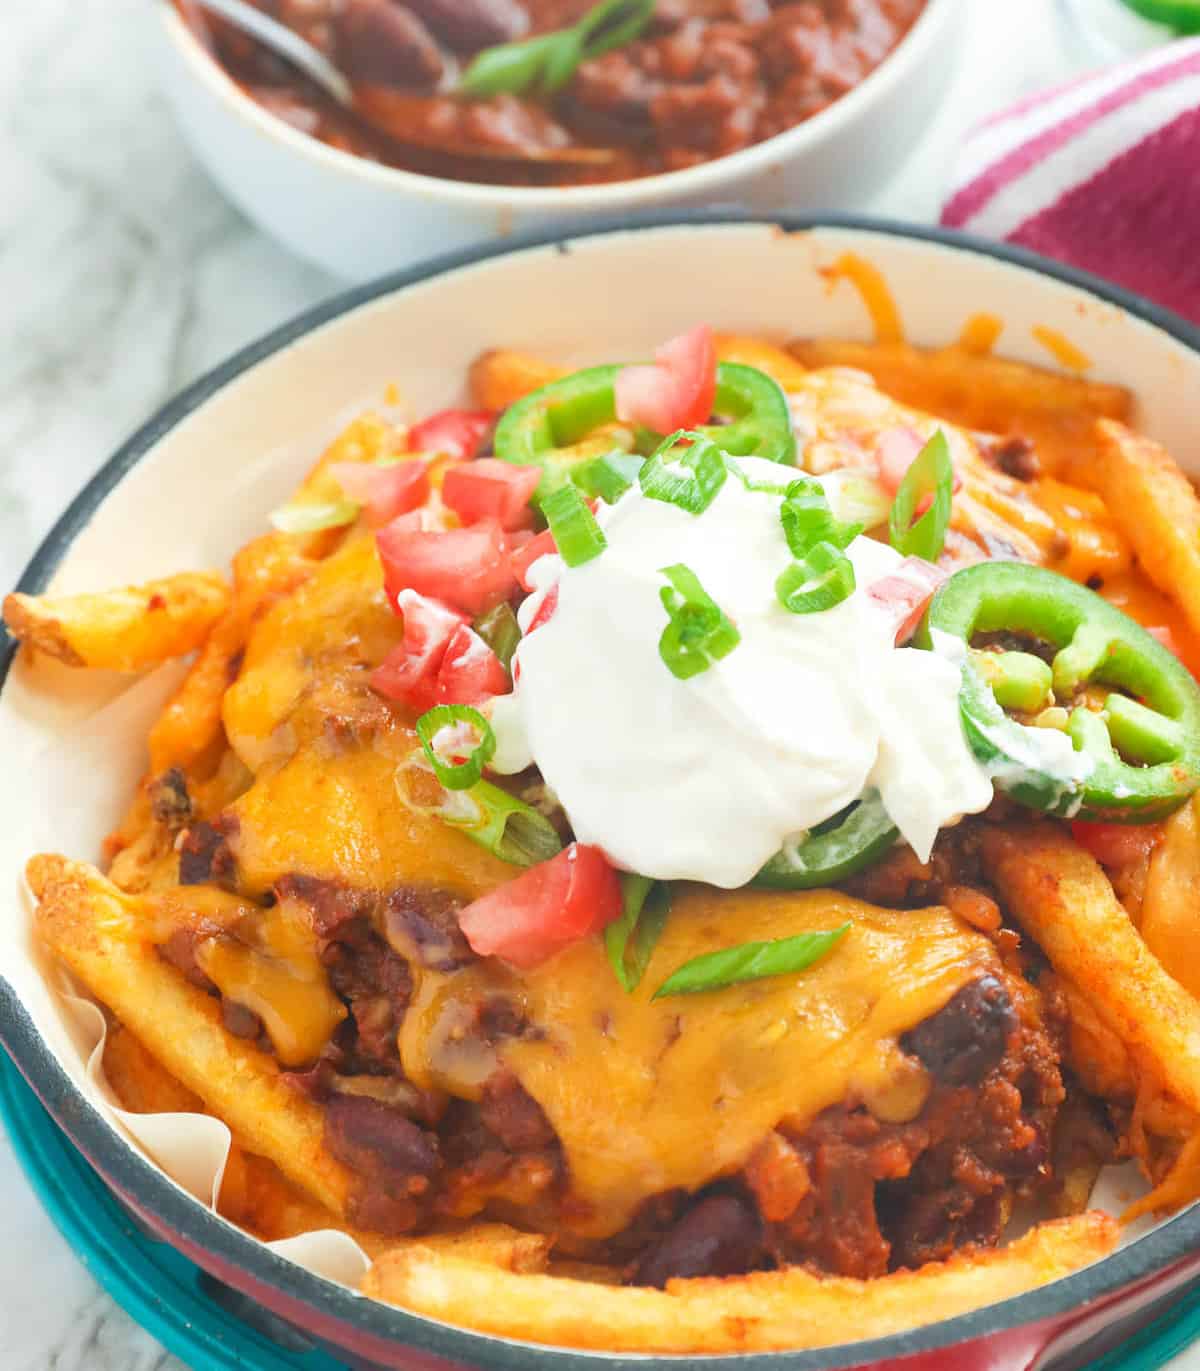 Chili cheese fries topped with sour cream, diced tomatoes and jalapeños